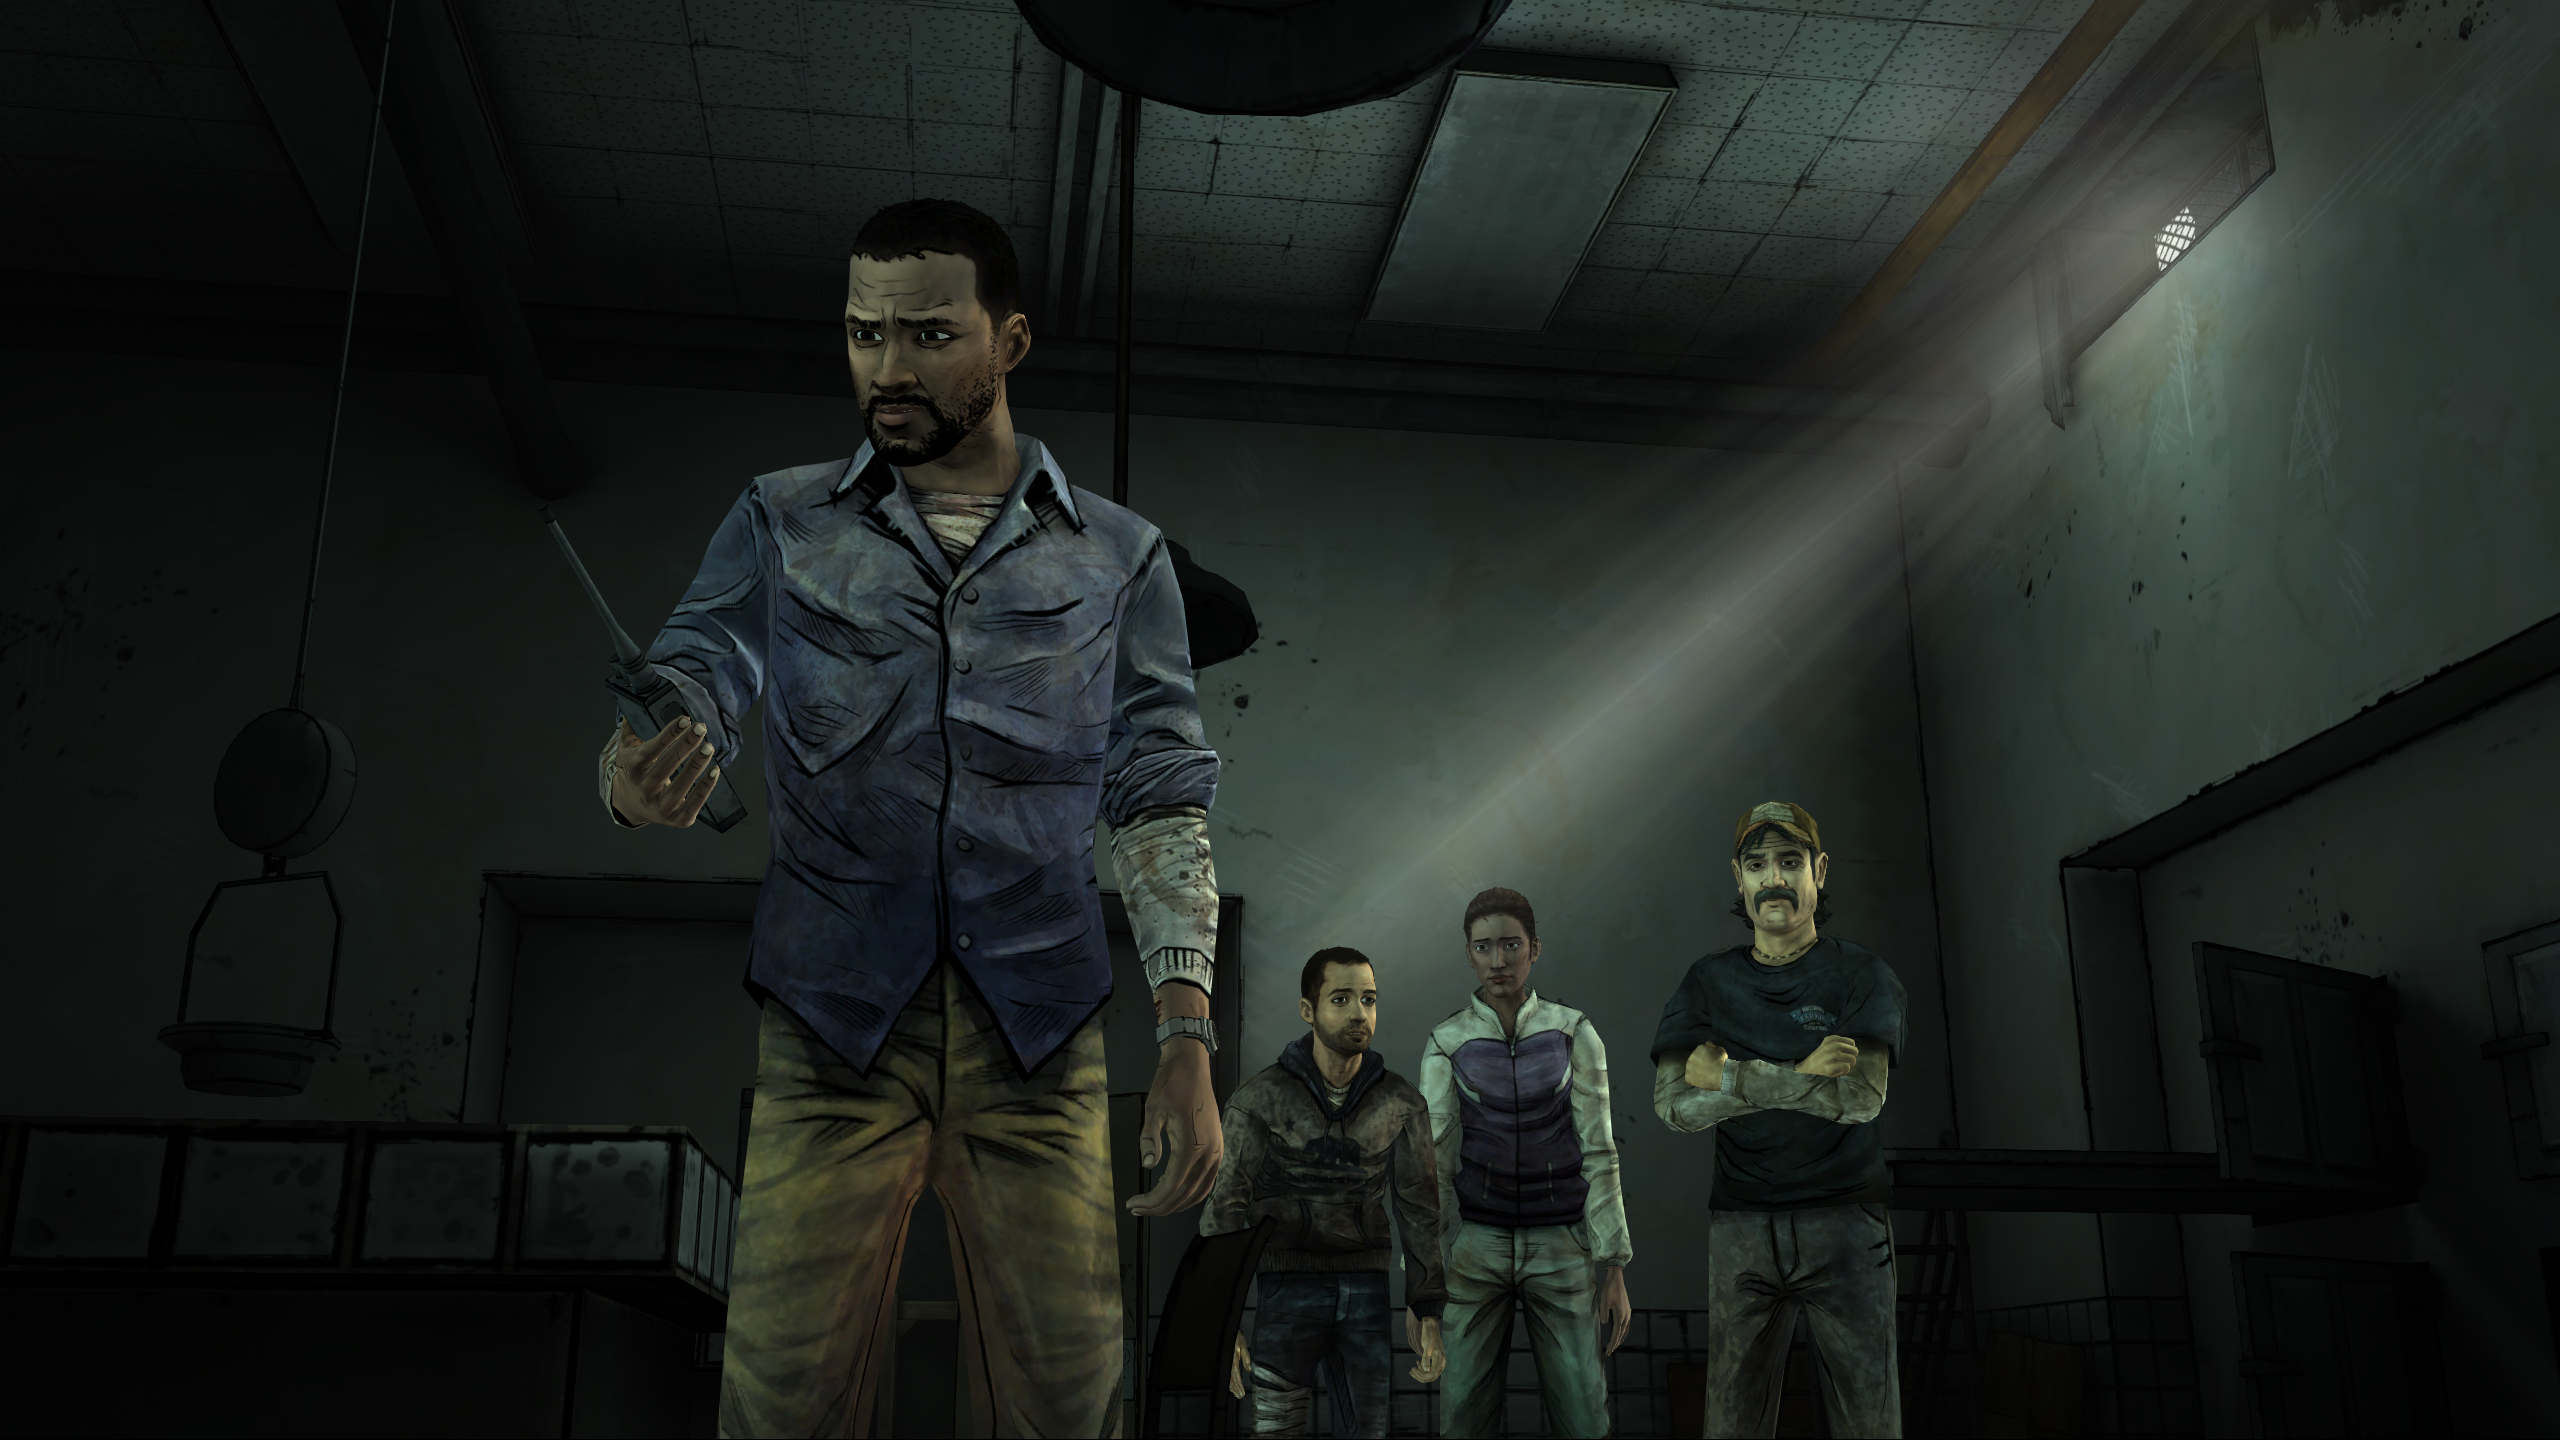 We the game every day. The Walking Dead: Episode 4 - around every Corner. The Walking Dead игра обои на рабочий стол.